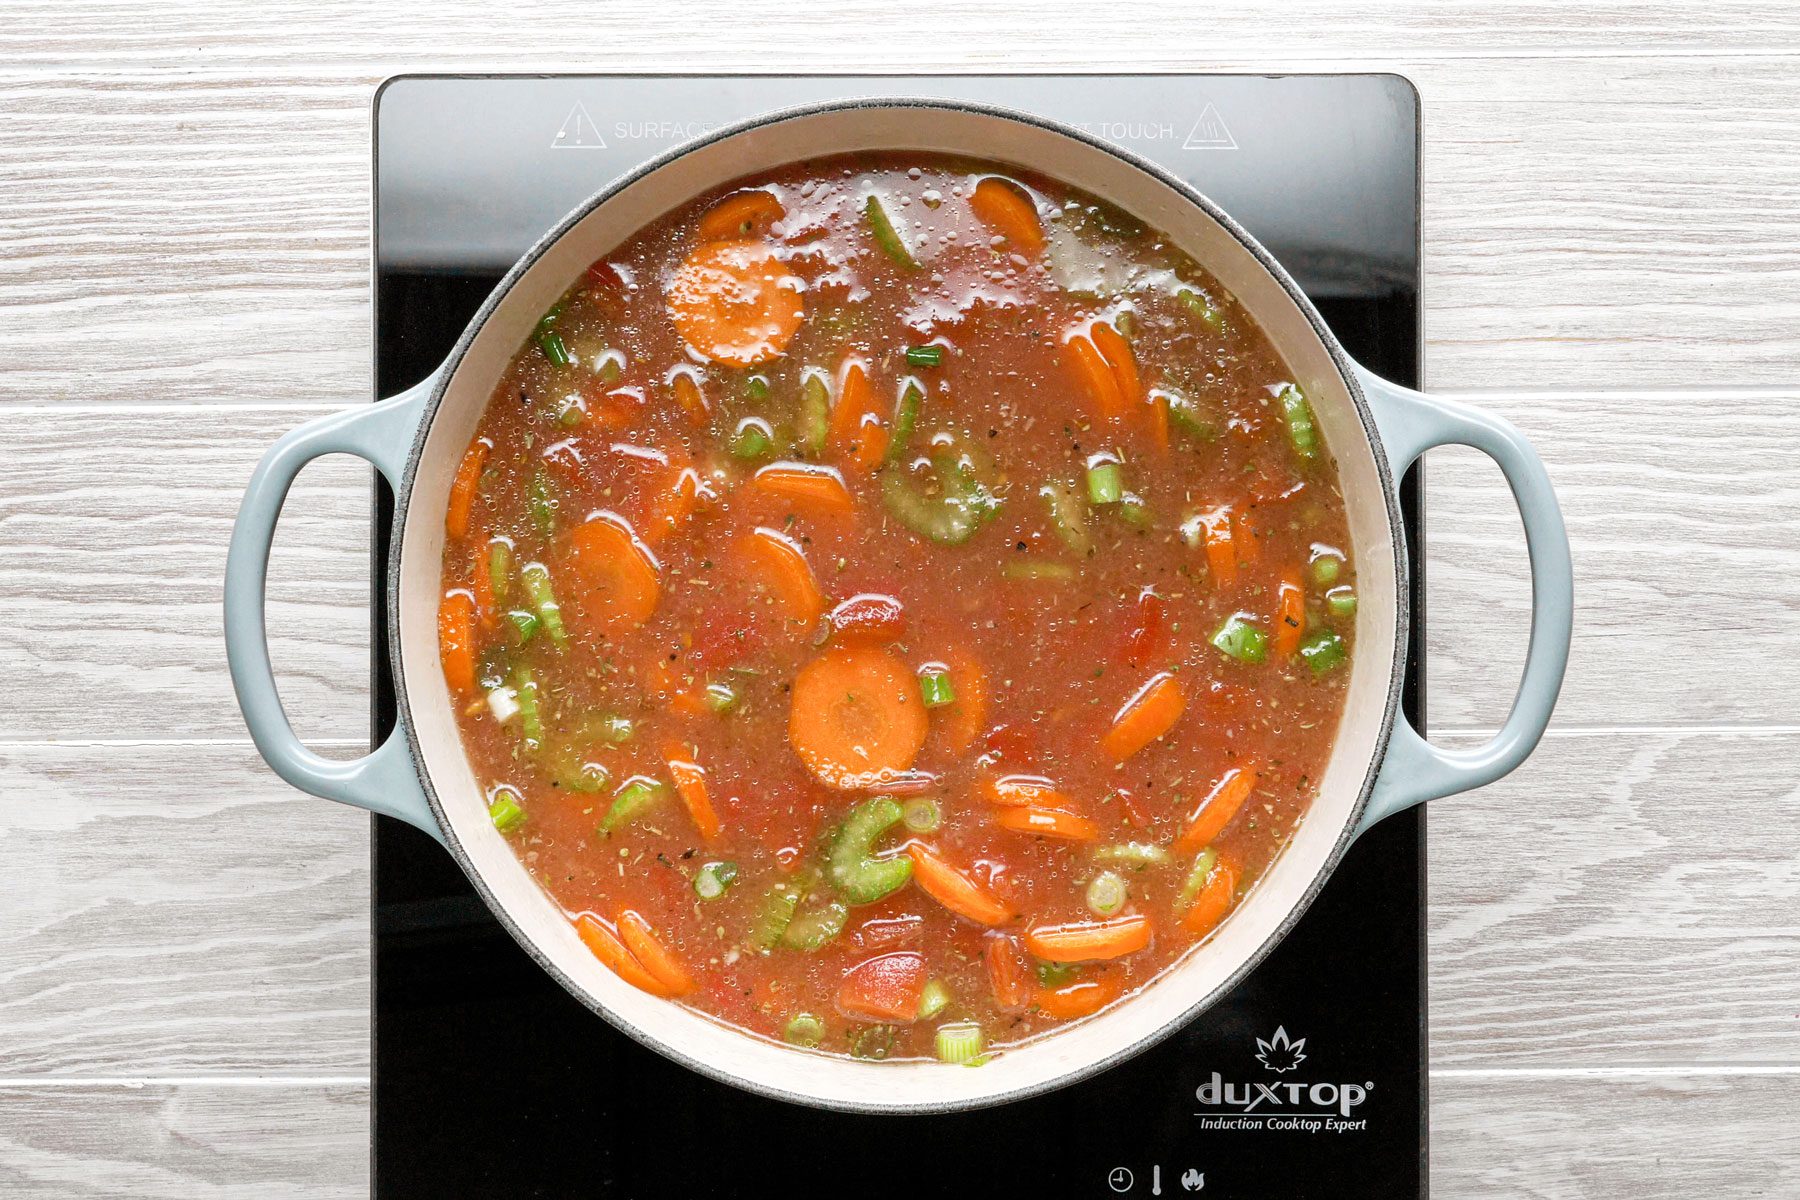 Lentils, tomatoes, carrots and other vegetables mixed inside a large dutch oven